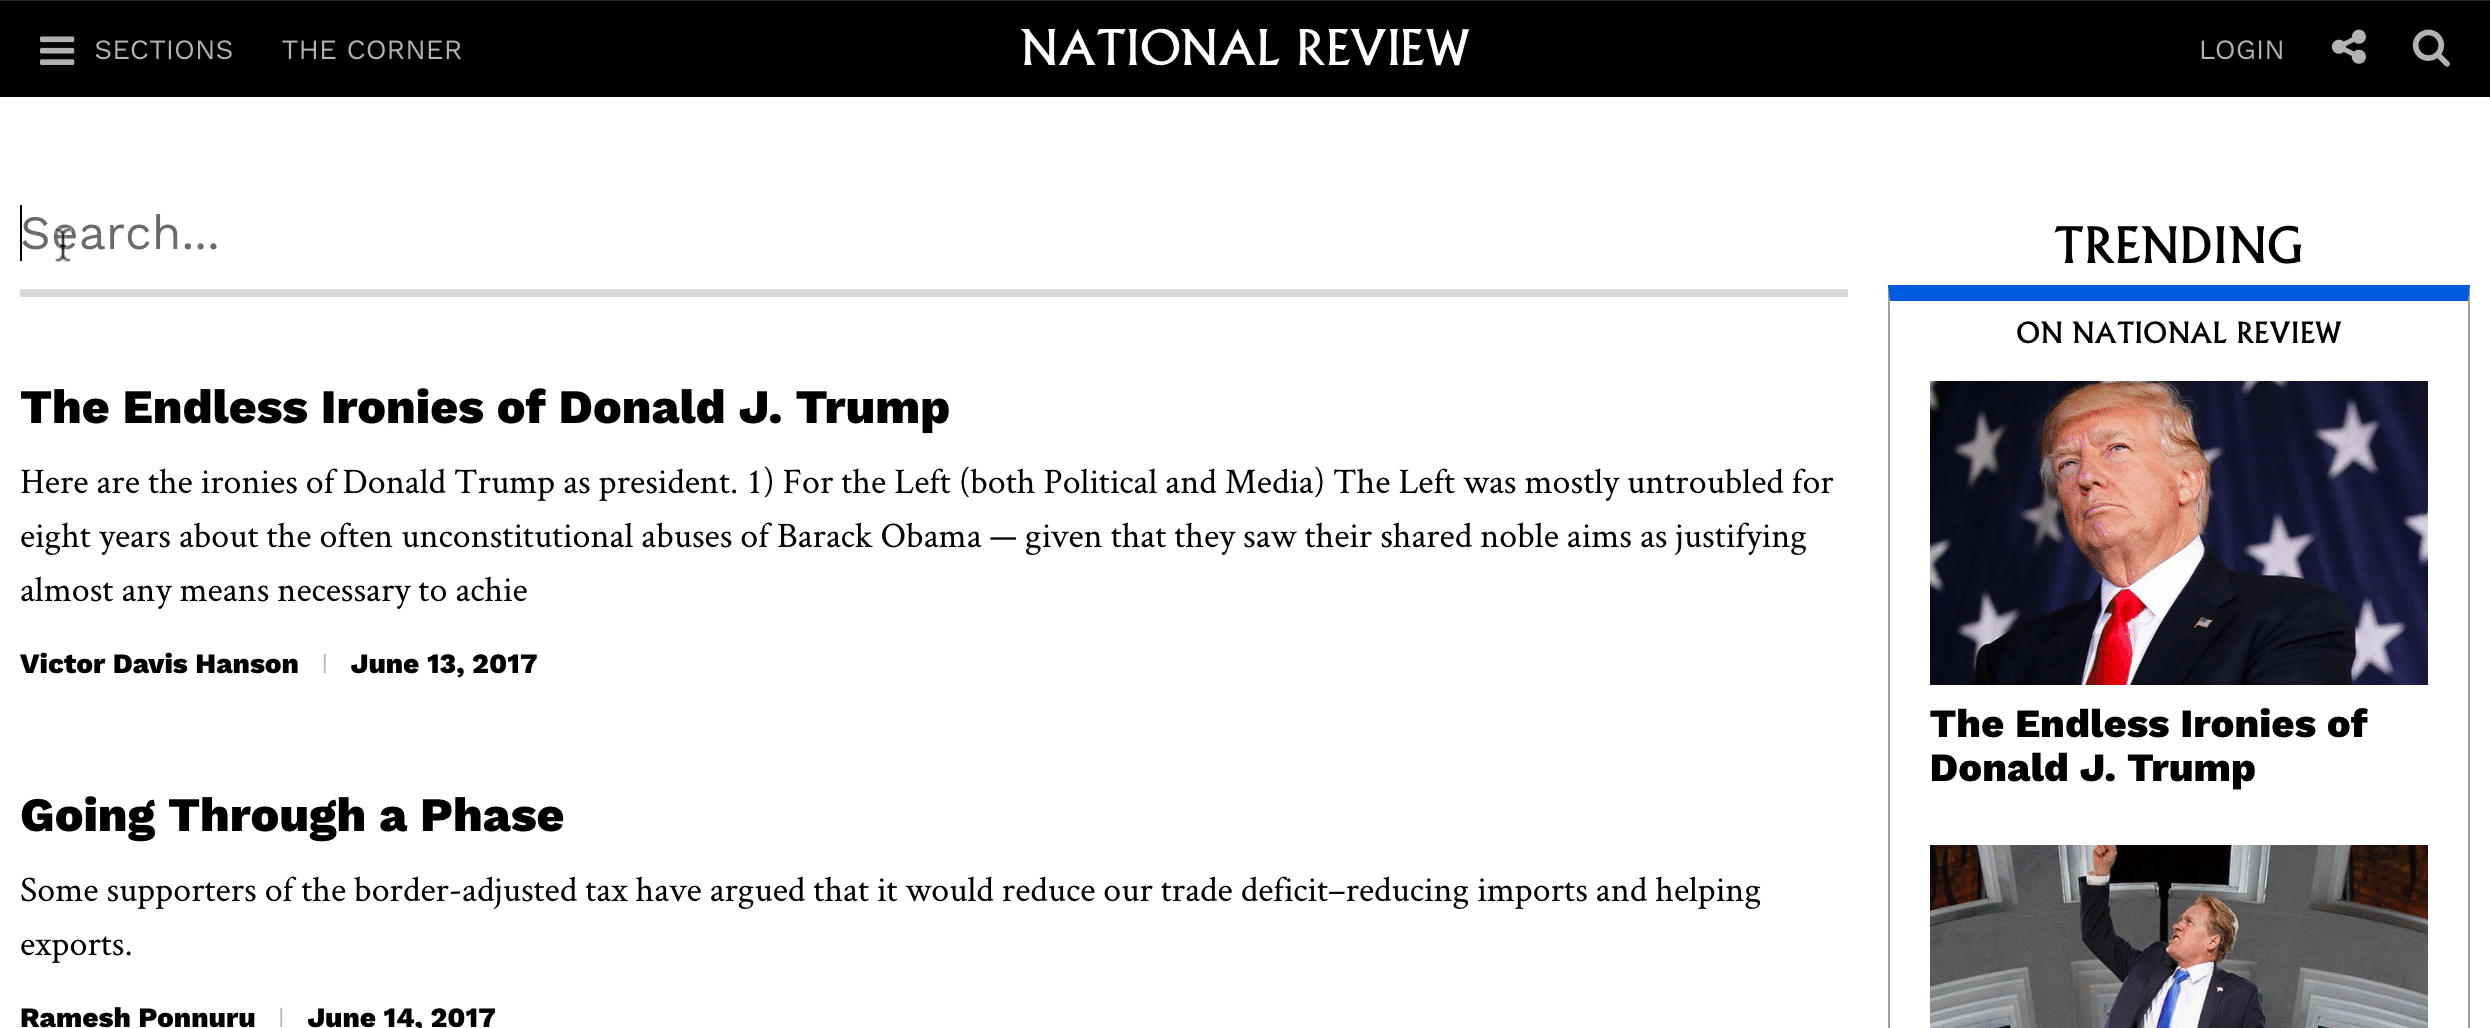 National Review Search